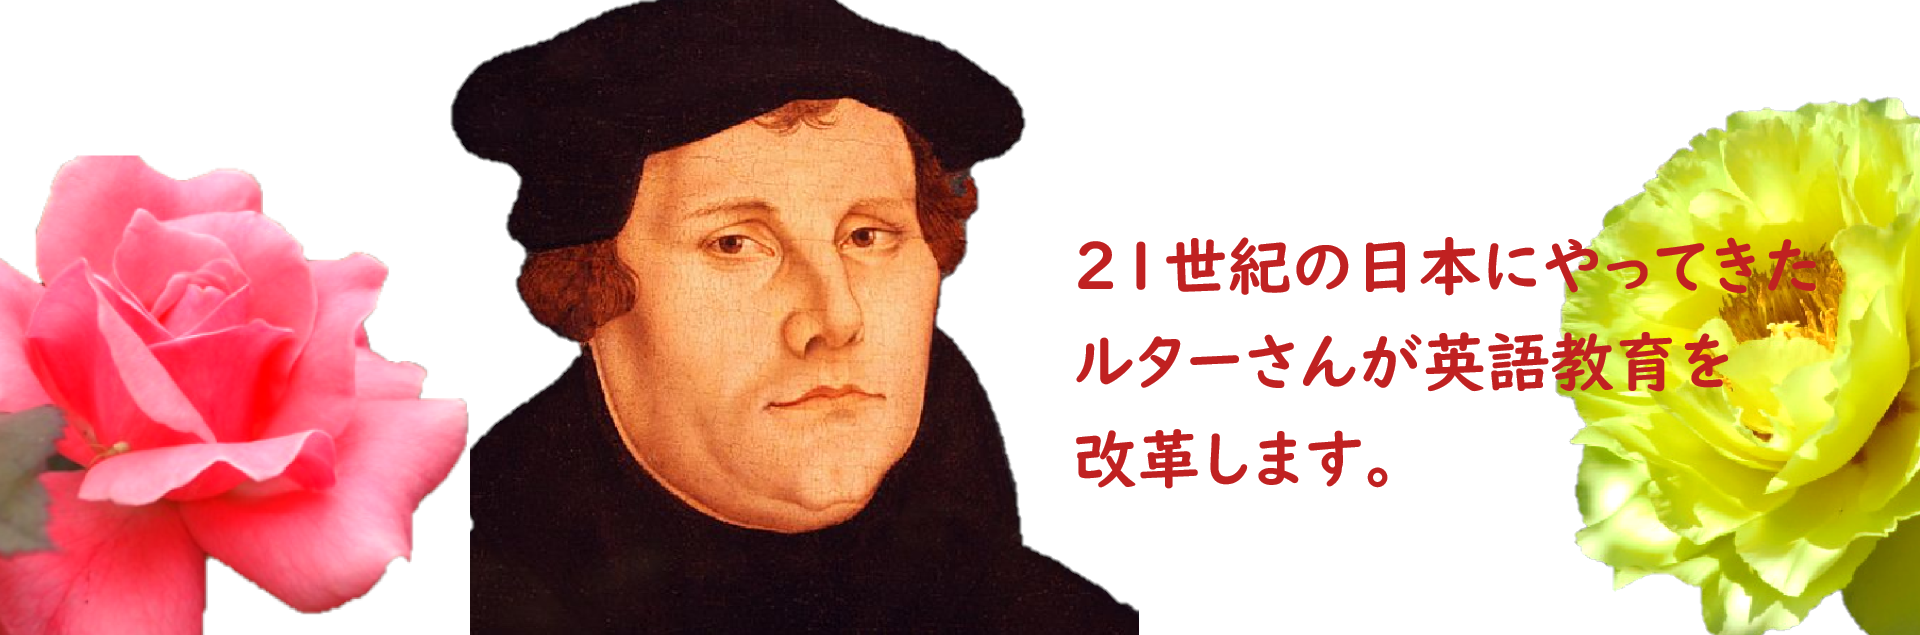 Eibumpoluther(Luther the English Grammarian) comes to the 21st century and reforms English education.